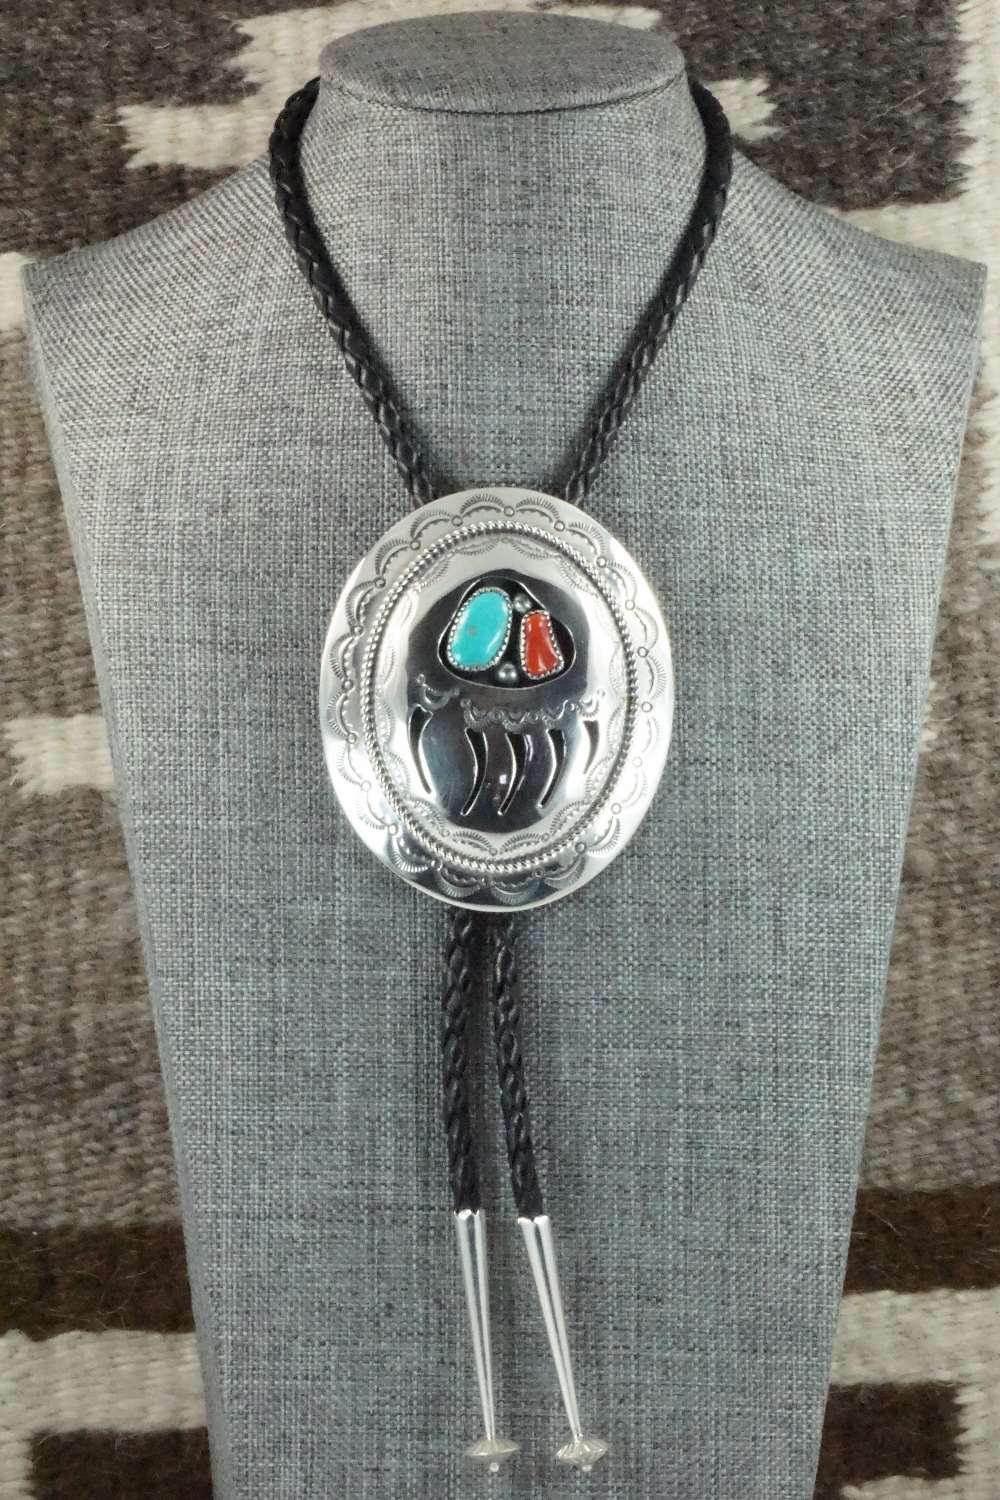 Turquoise, Coral & Sterling Silver Bolo Tie - Wilbert Muskett Sr.